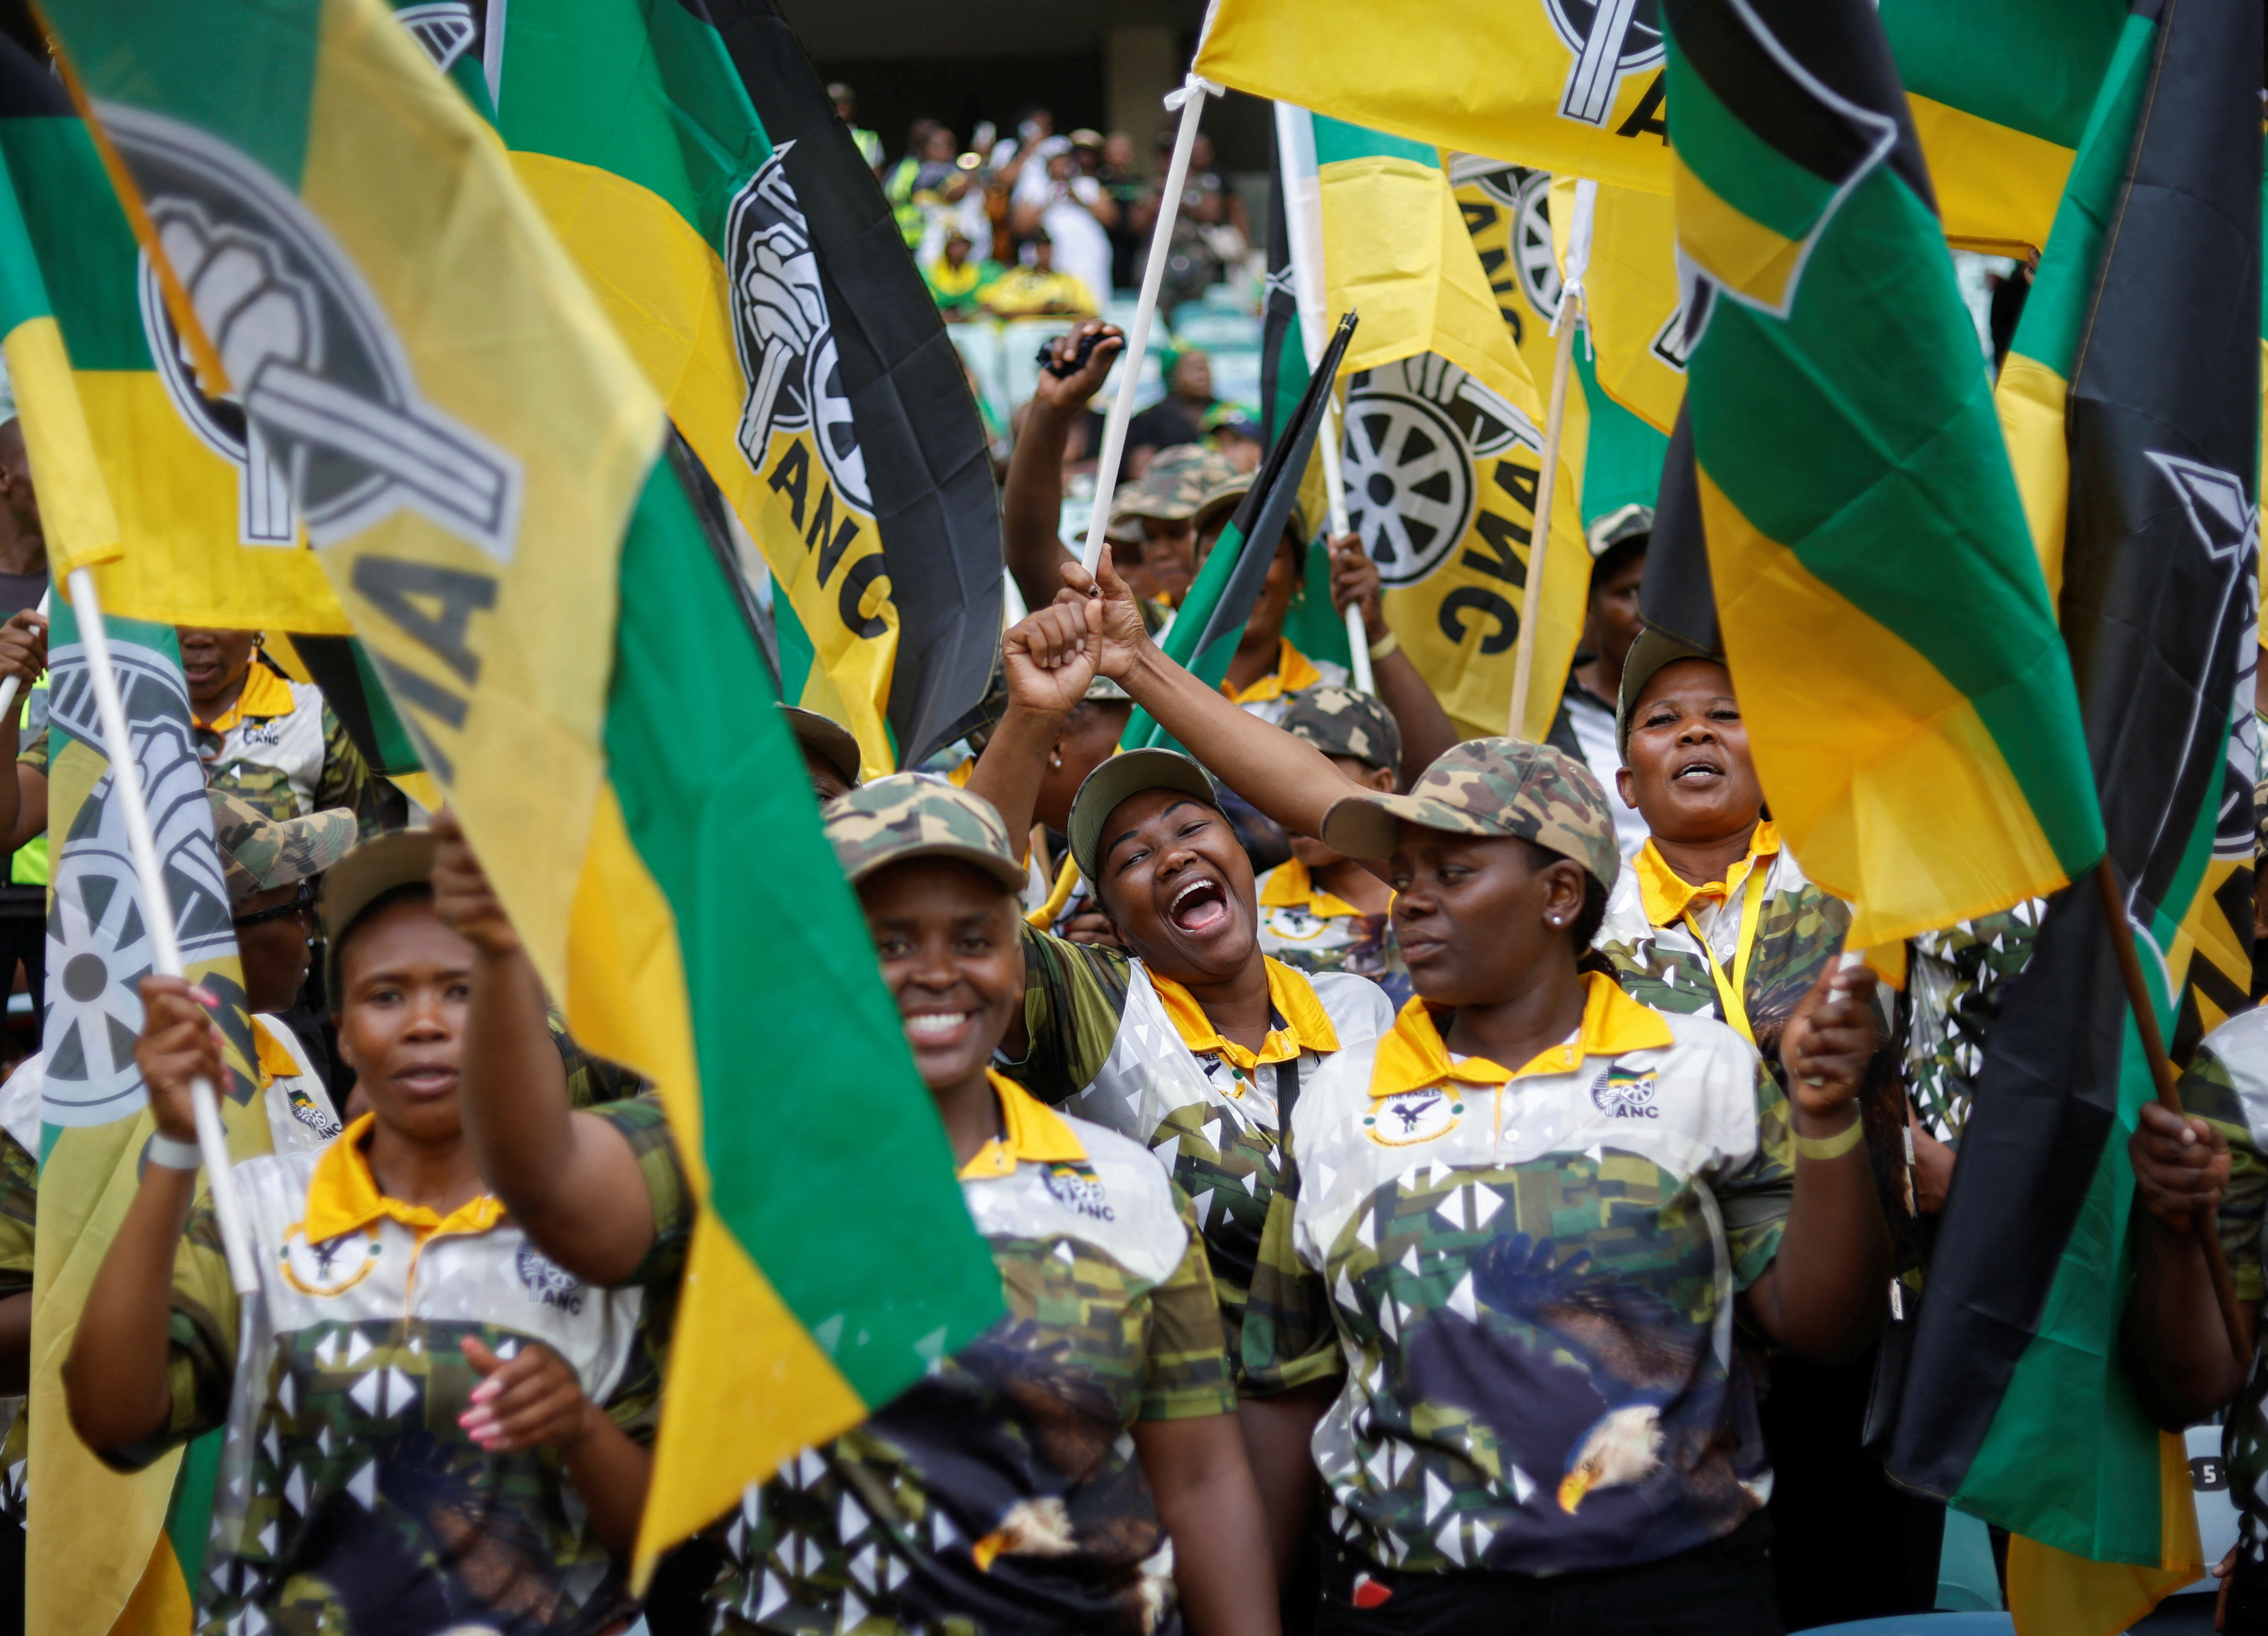 Supporters react at the African National Congress Election Manifesto launch in Durban